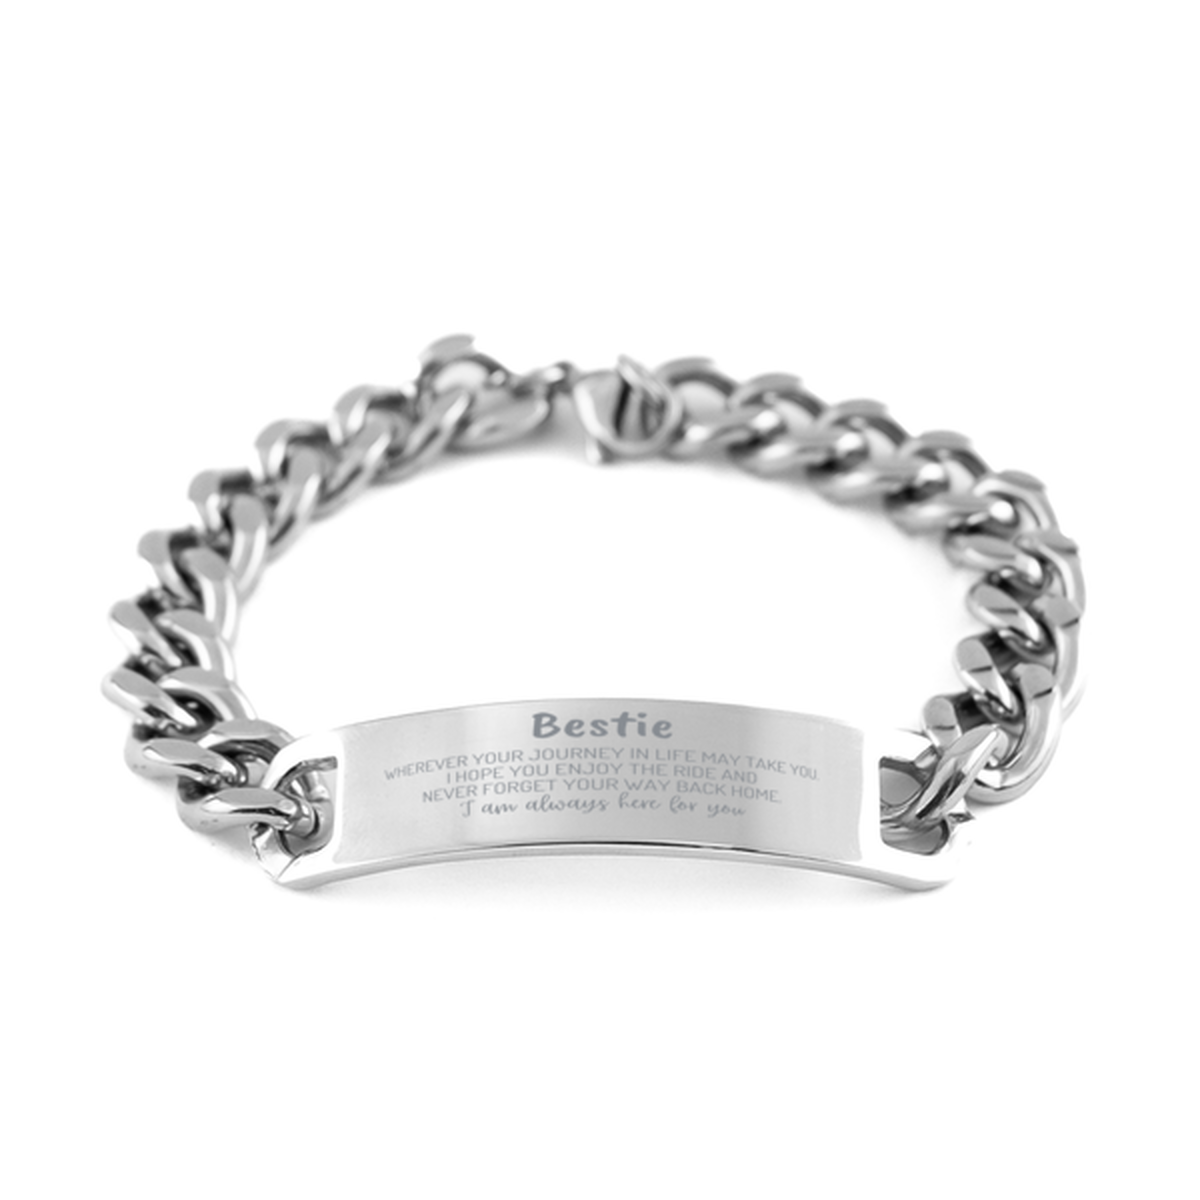 Bestie wherever your journey in life may take you, I am always here for you Bestie Cuban Chain Stainless Steel Bracelet, Awesome Christmas Gifts For Bestie, Bestie Birthday Gifts for Men Women Family Loved One